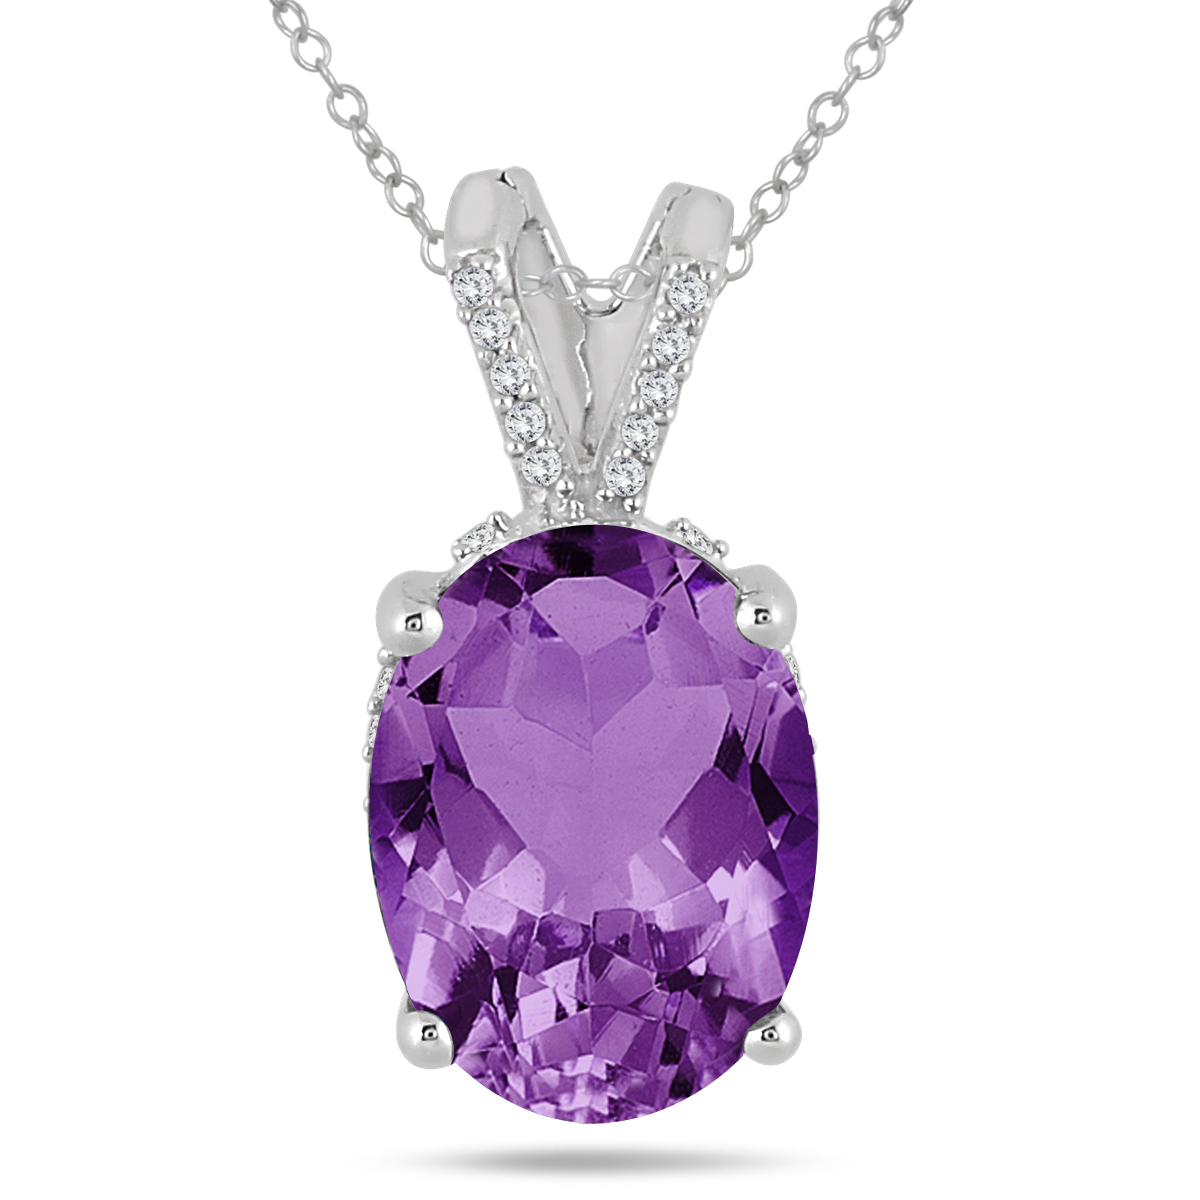 Image of 7 Carat Oval Amethyst and Diamond Engraved Pendant in 10K White Gold